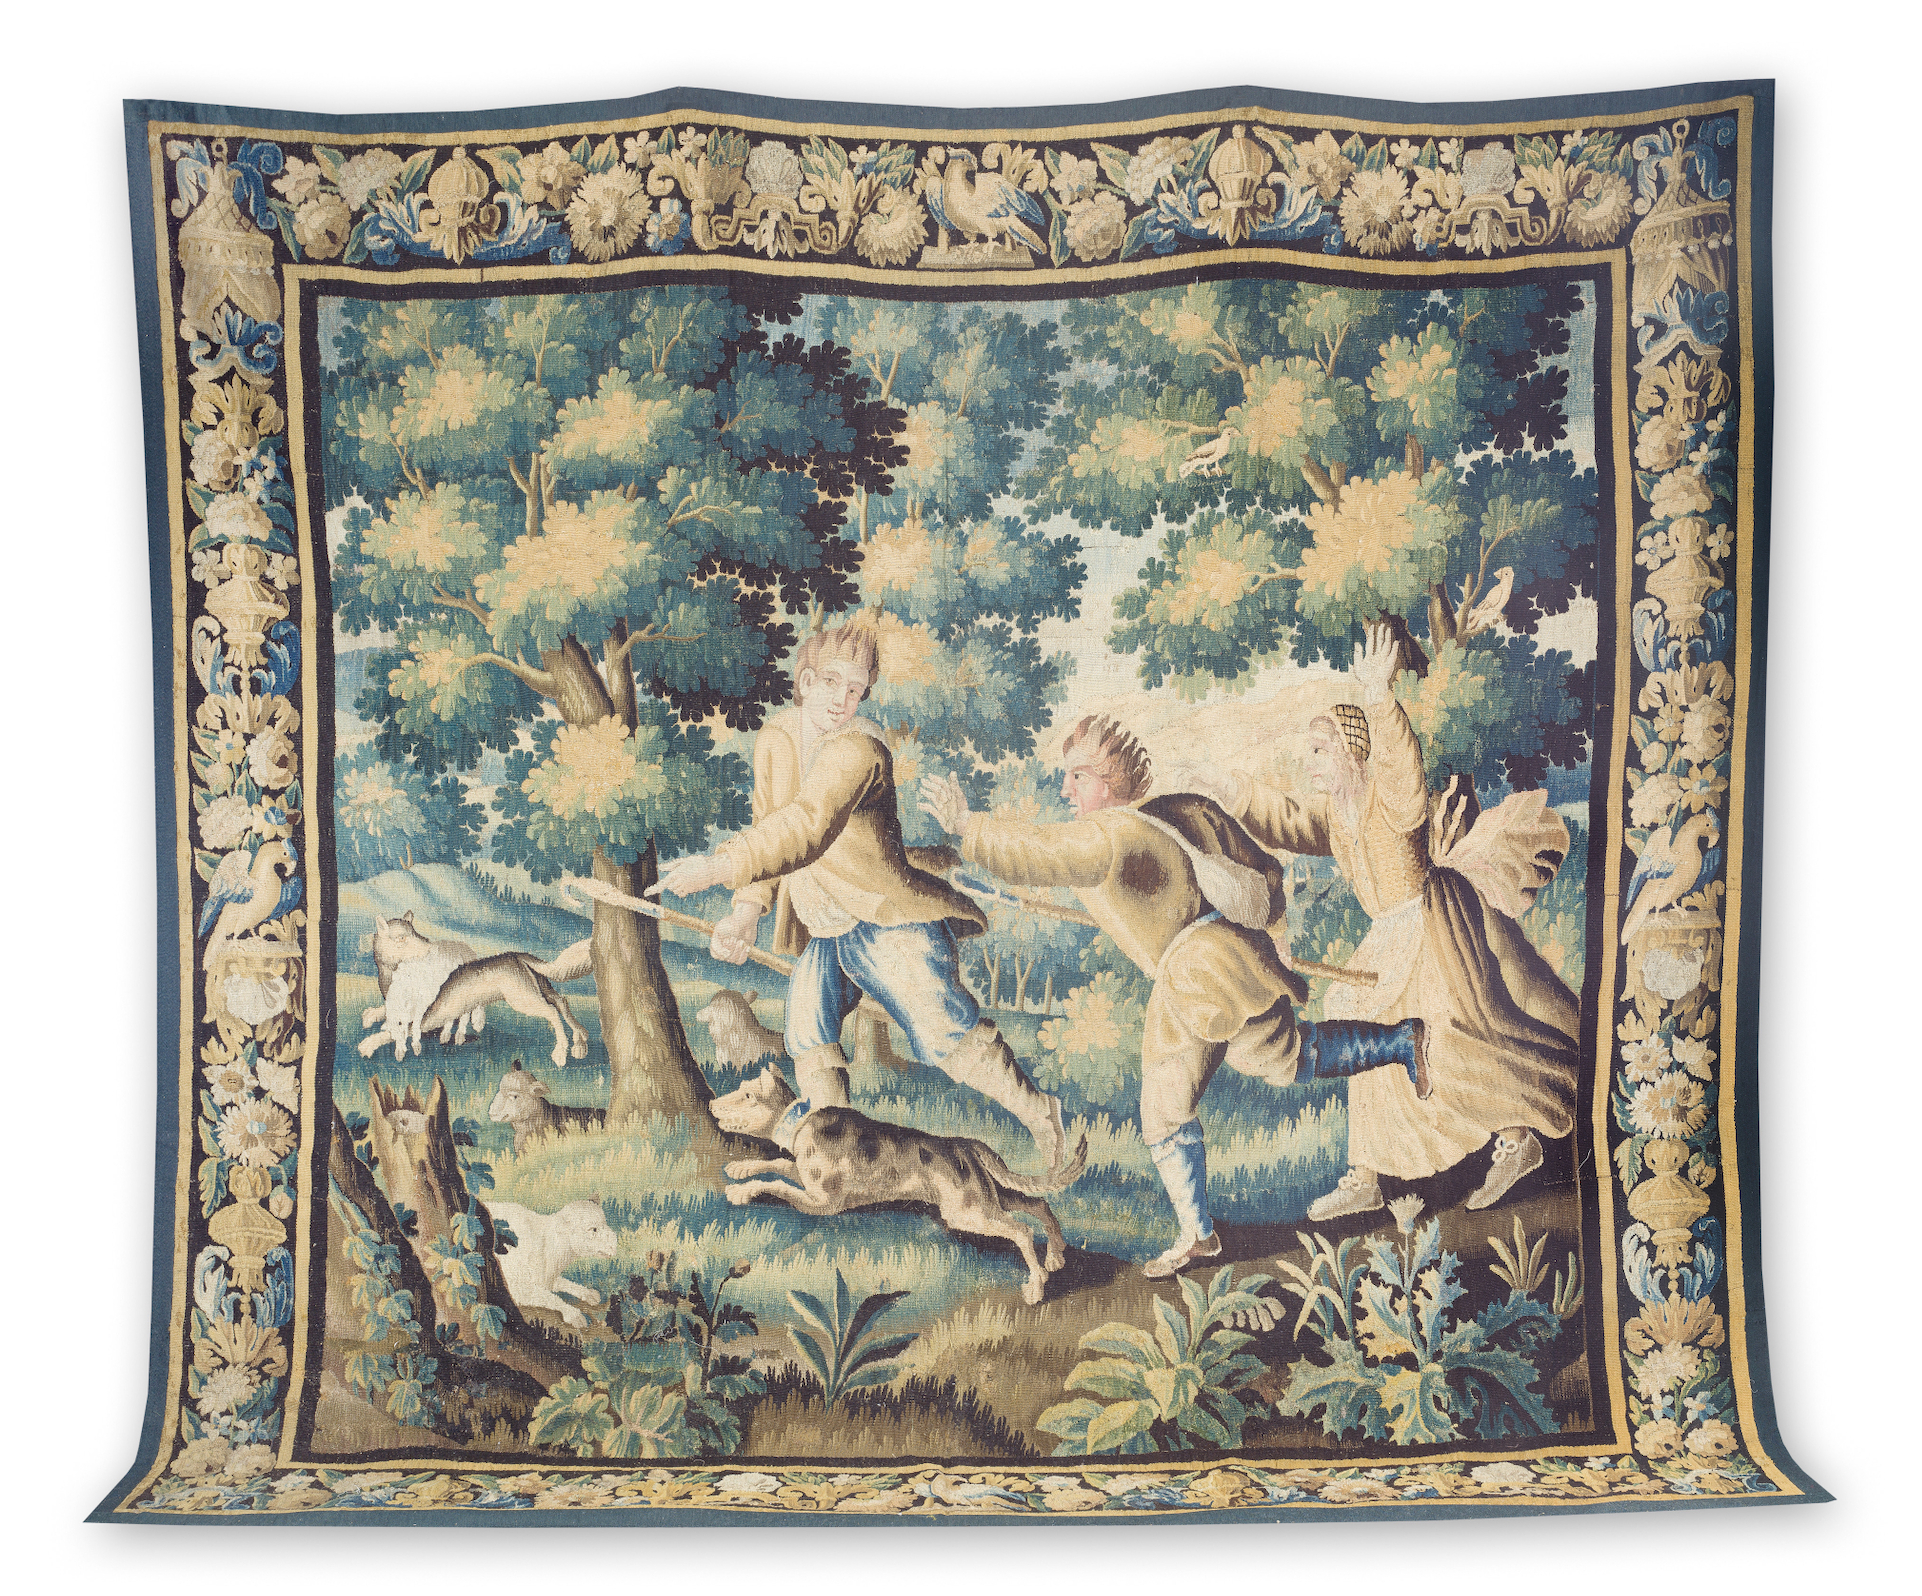 Aubusson tapestry, late 17th century, estimated at £8,000-£12,000. Image courtesy of Bonhams